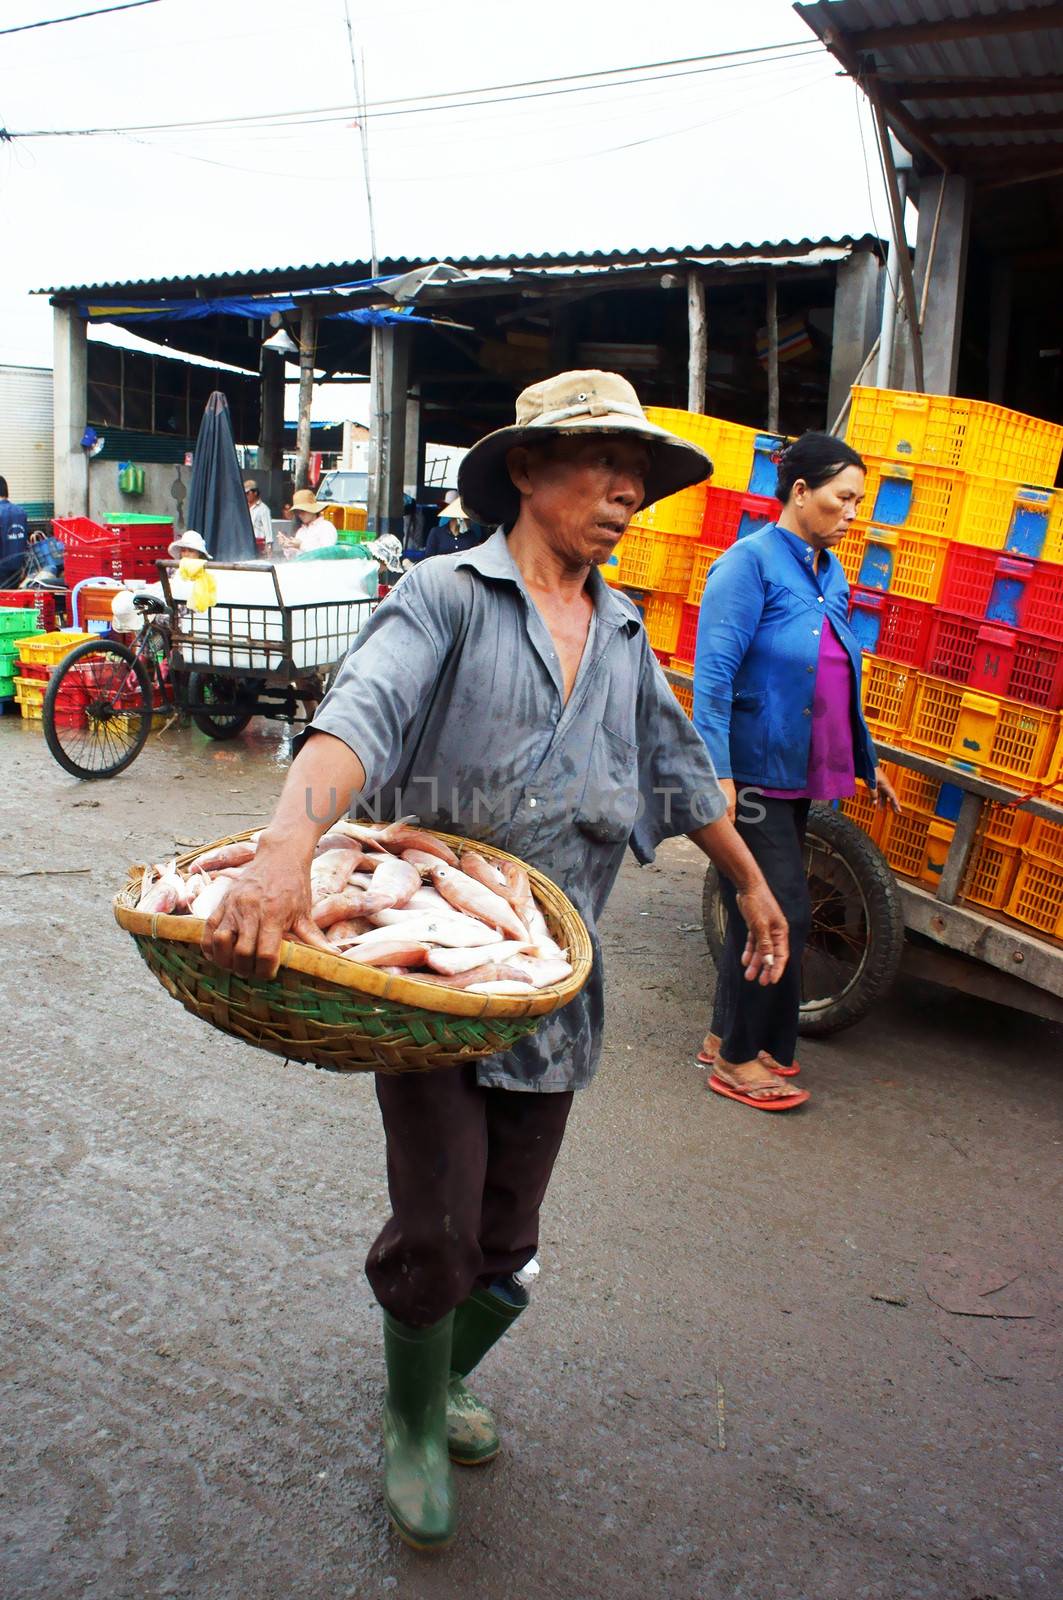 The man with tired face carry fish basket into fishing market in vertical frame. July 15, 2013